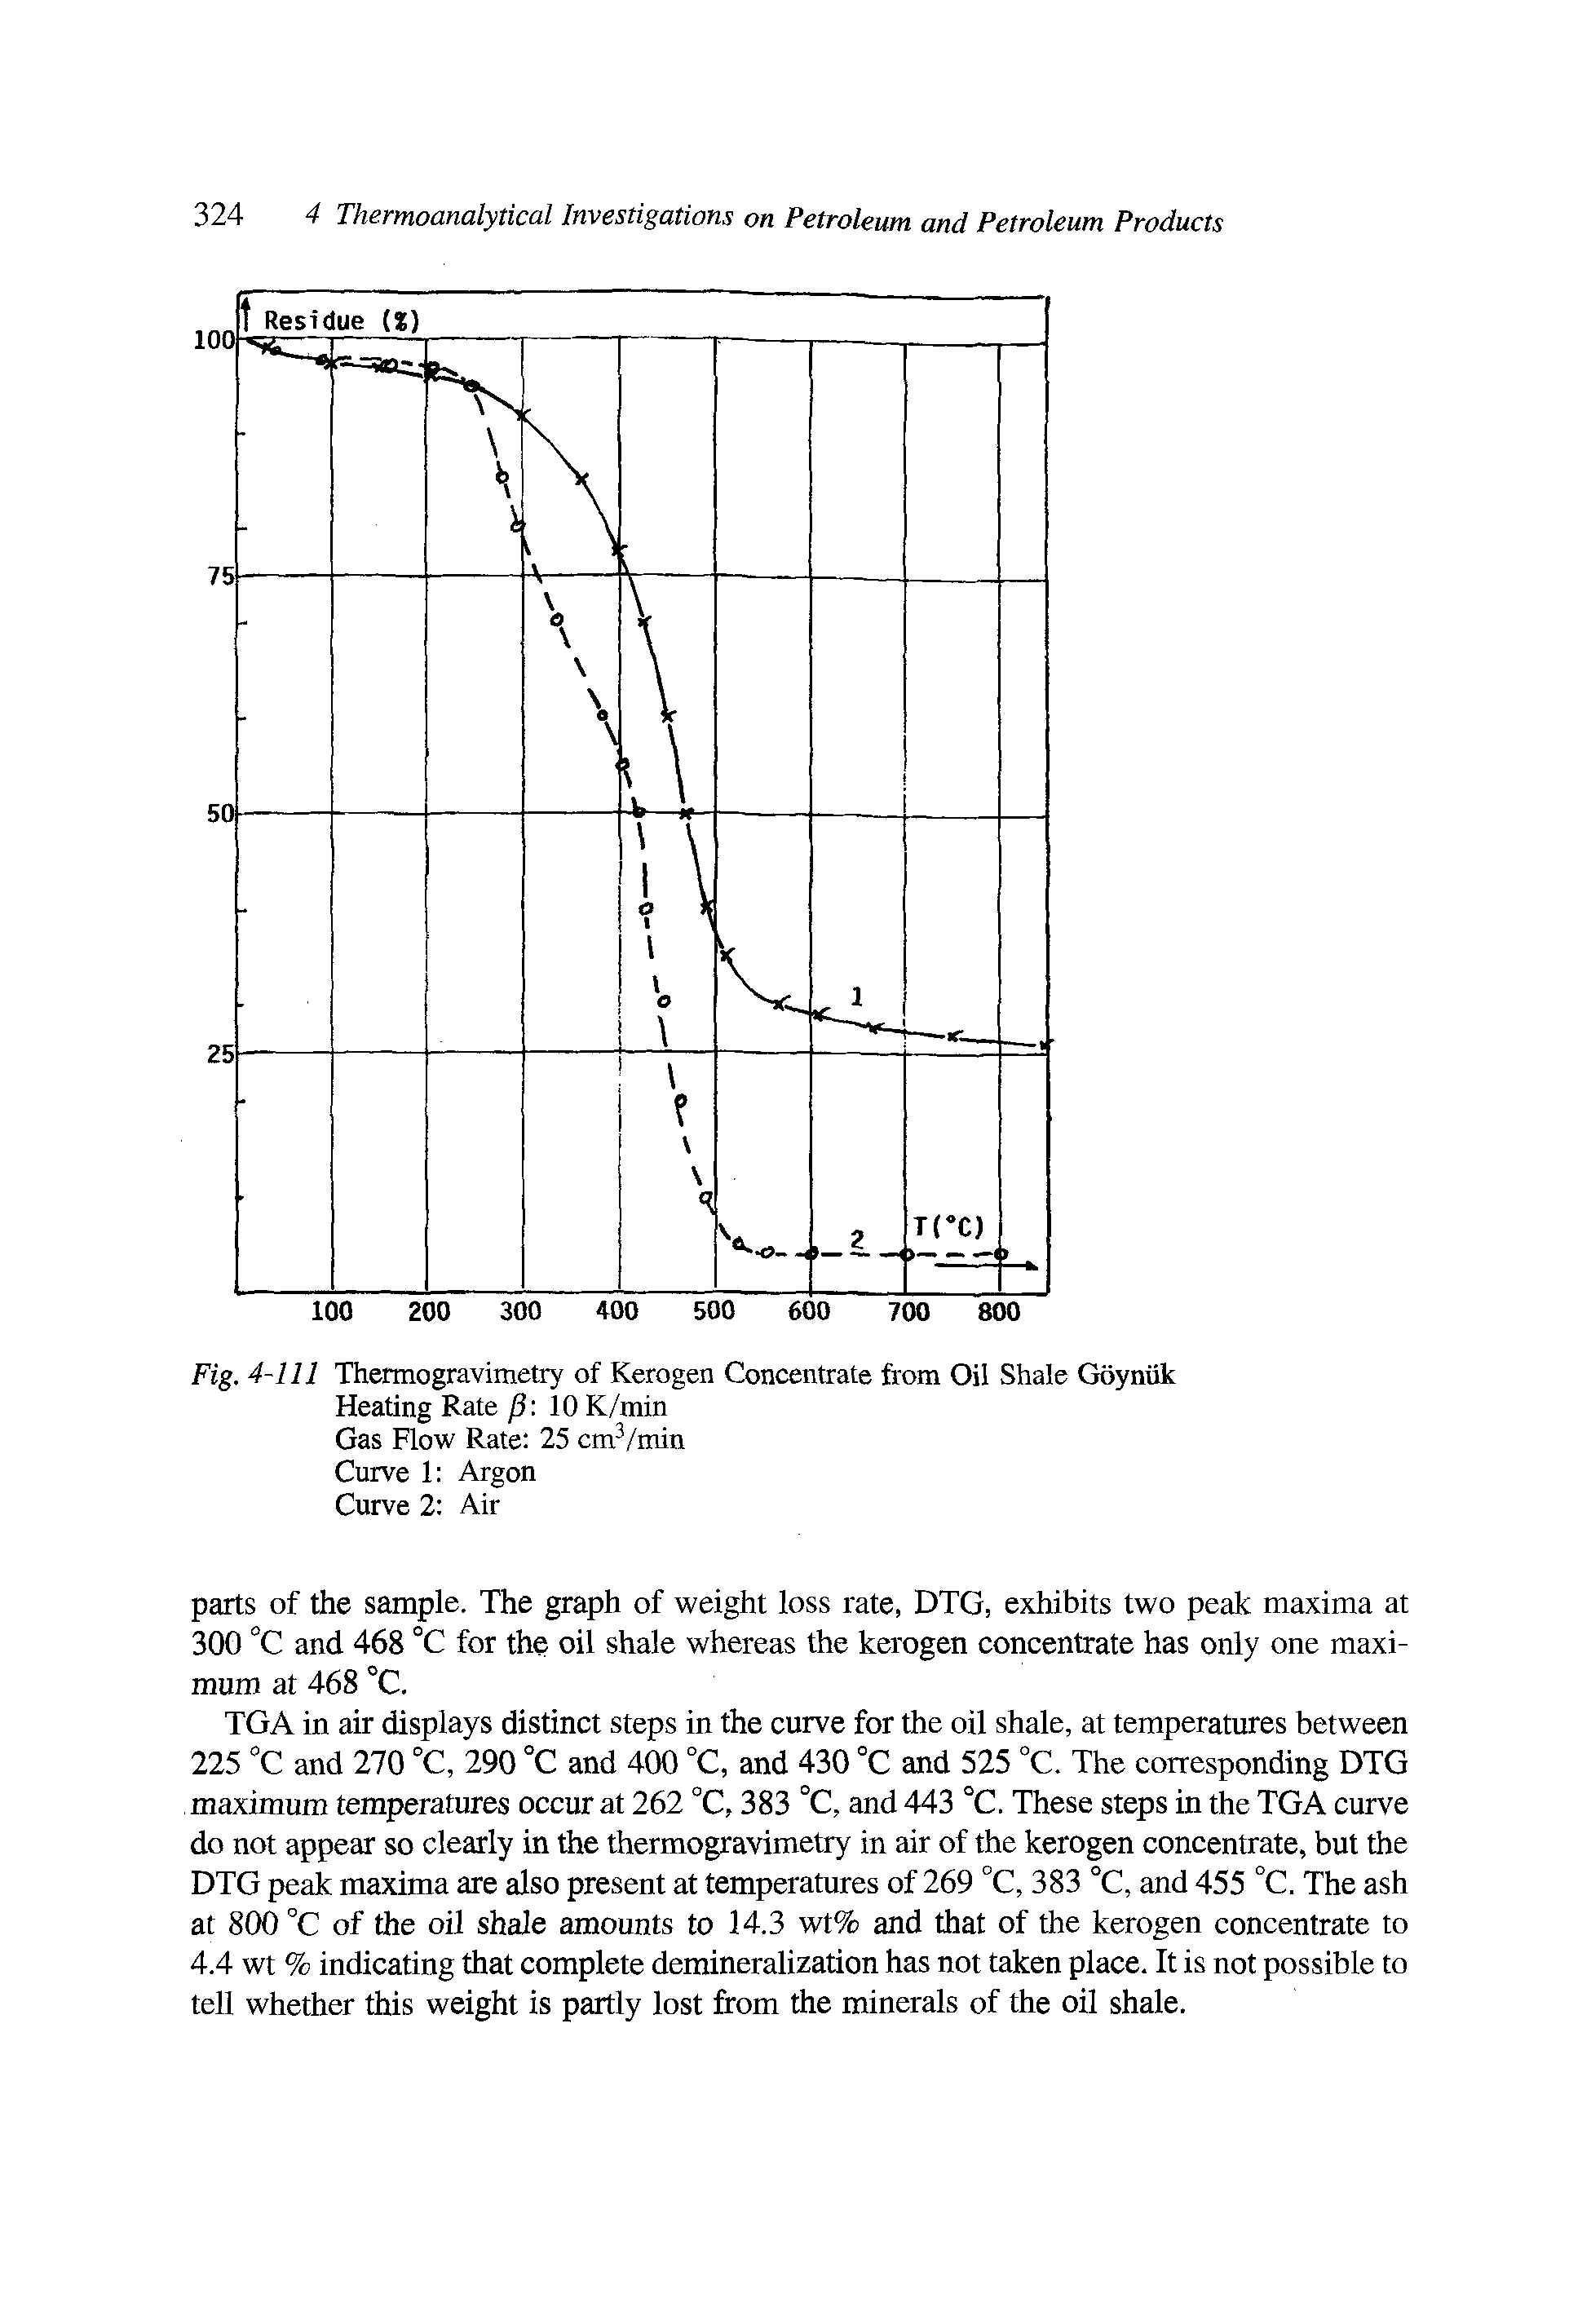 Fig. 4-111 Thermogravimetry of Kerogen Concentrate from Oil Shale Goyniik Heating Rate 10 K/min Gas Flow Rate 25 cm /min Curve 1 Argon Curve 2 Air...